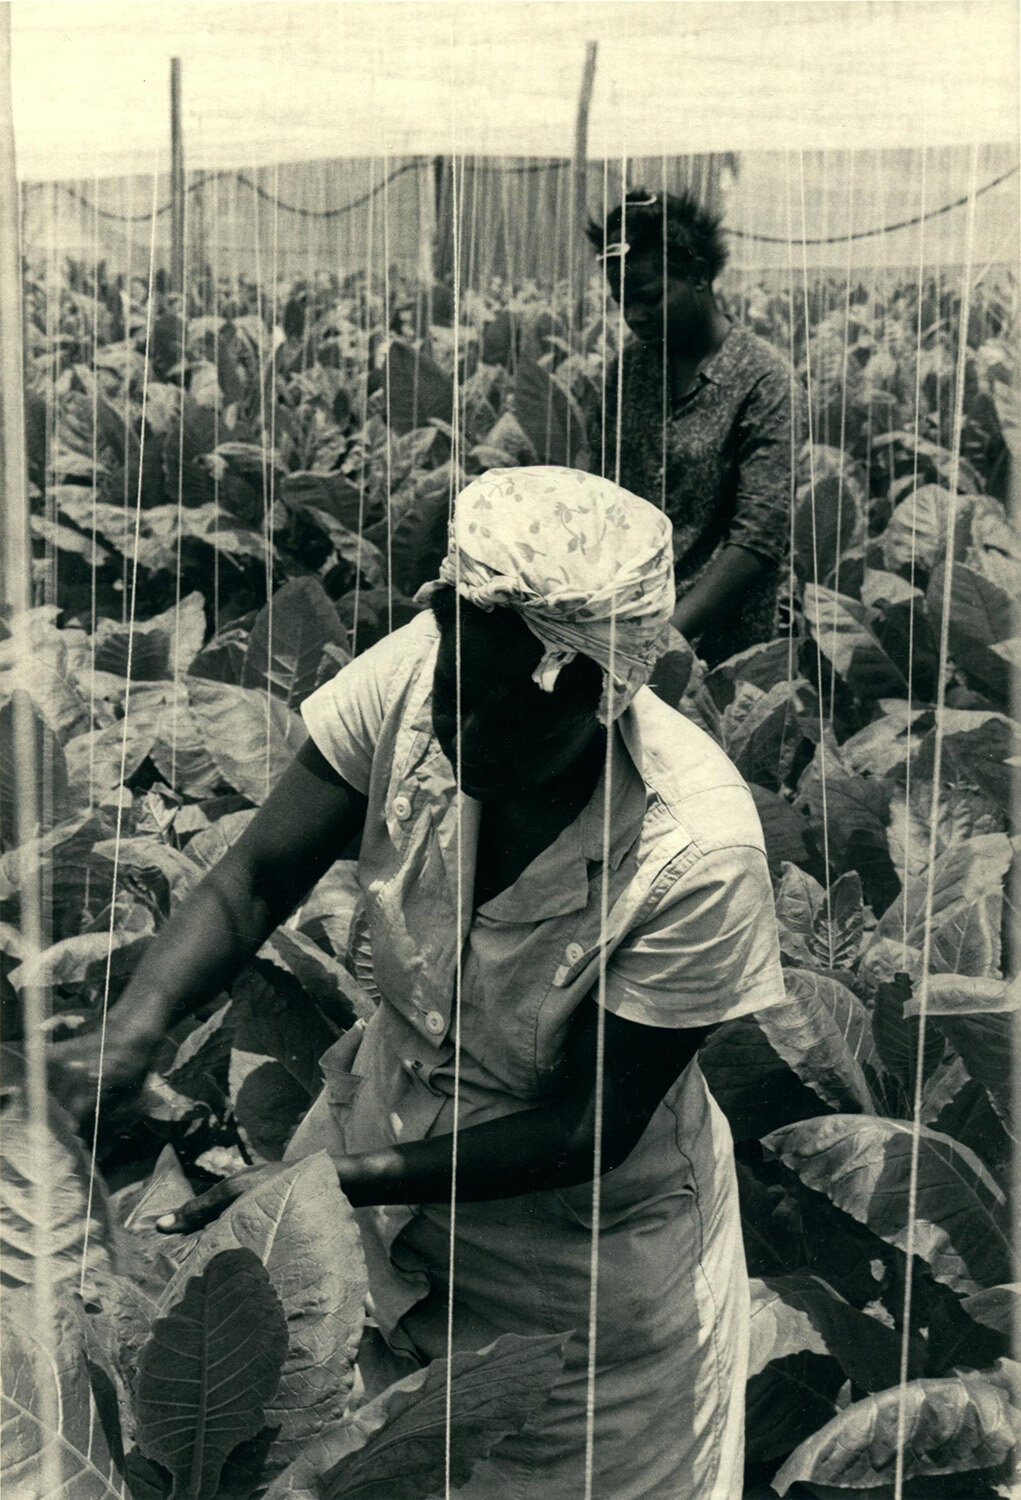   Tobacco Workers , 1964 Silver Gelatin Print 9 × 6 1/4 in. (image size) The Do Good Fund, Inc., 2017-42 